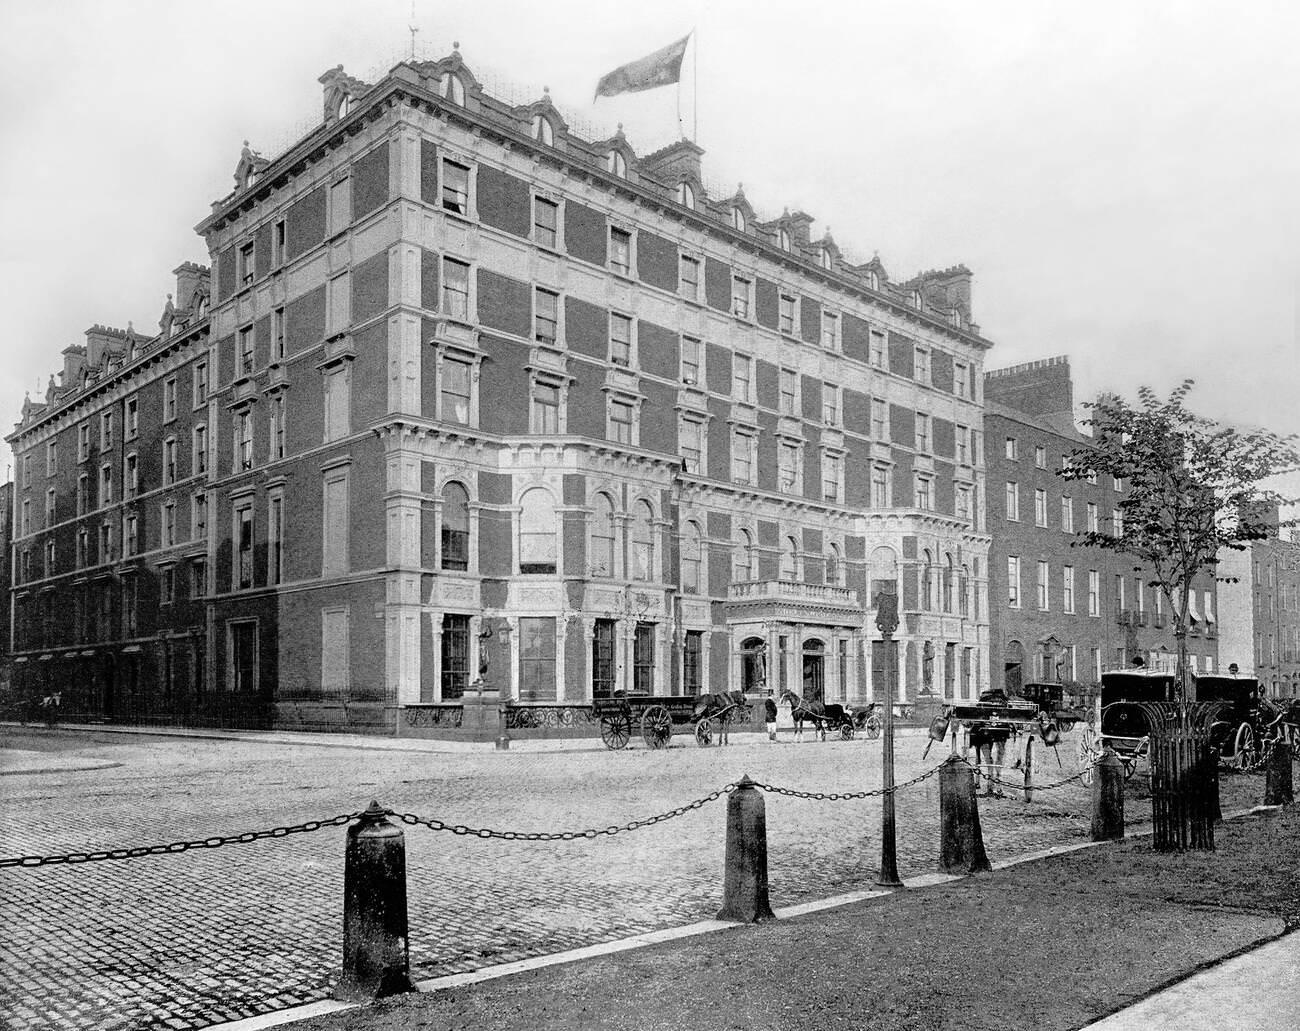 The Shelbourne Hotel, a historic hotel on the north side of St Stephen's Green in Dublin.